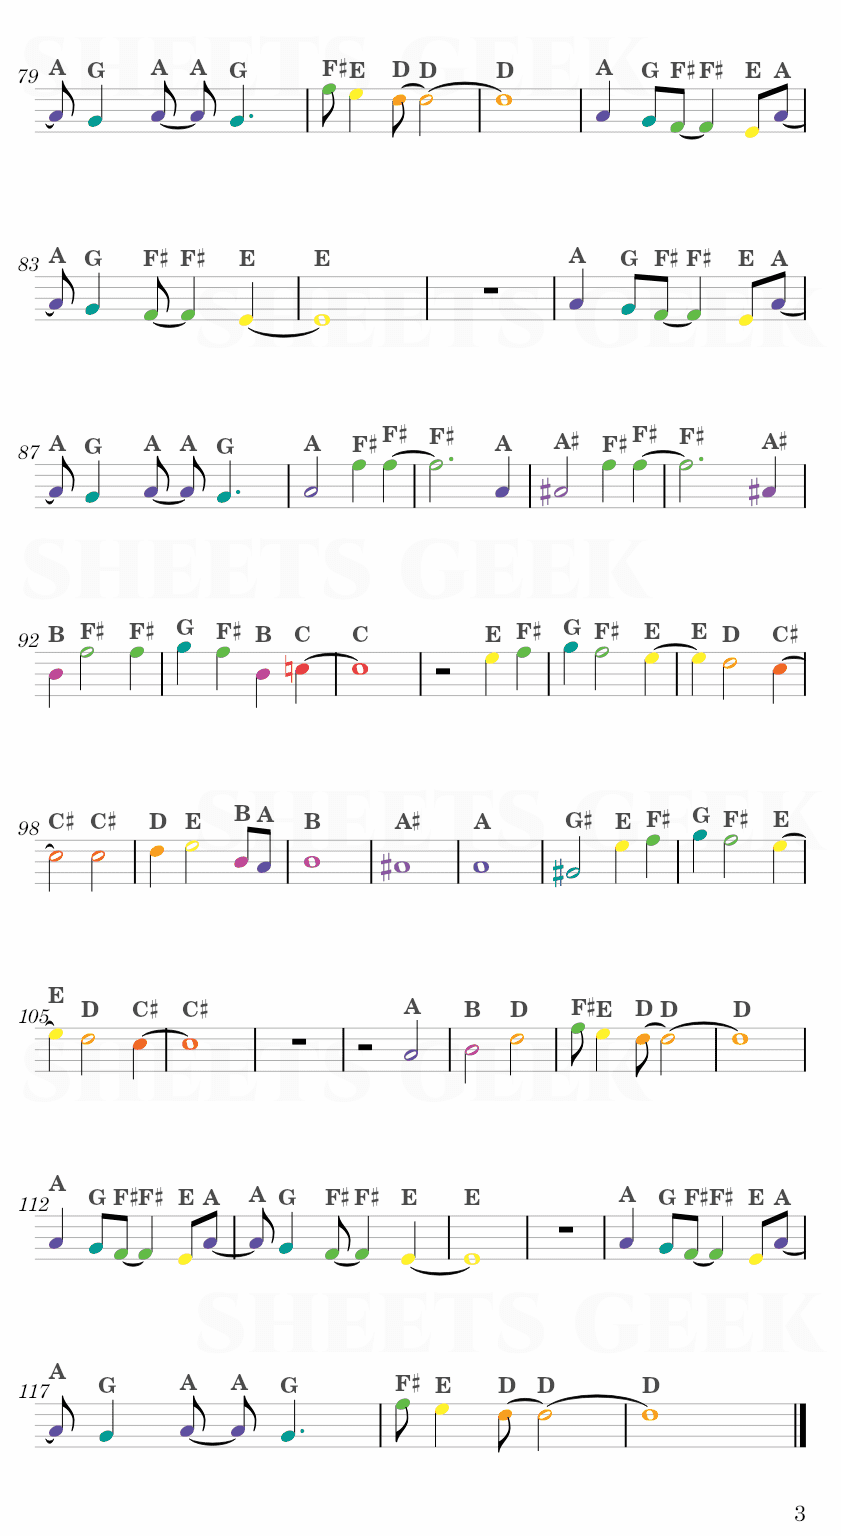 Cancer - Twenty One Pilots Easy Sheet Music Free for piano, keyboard, flute, violin, sax, cello page 3